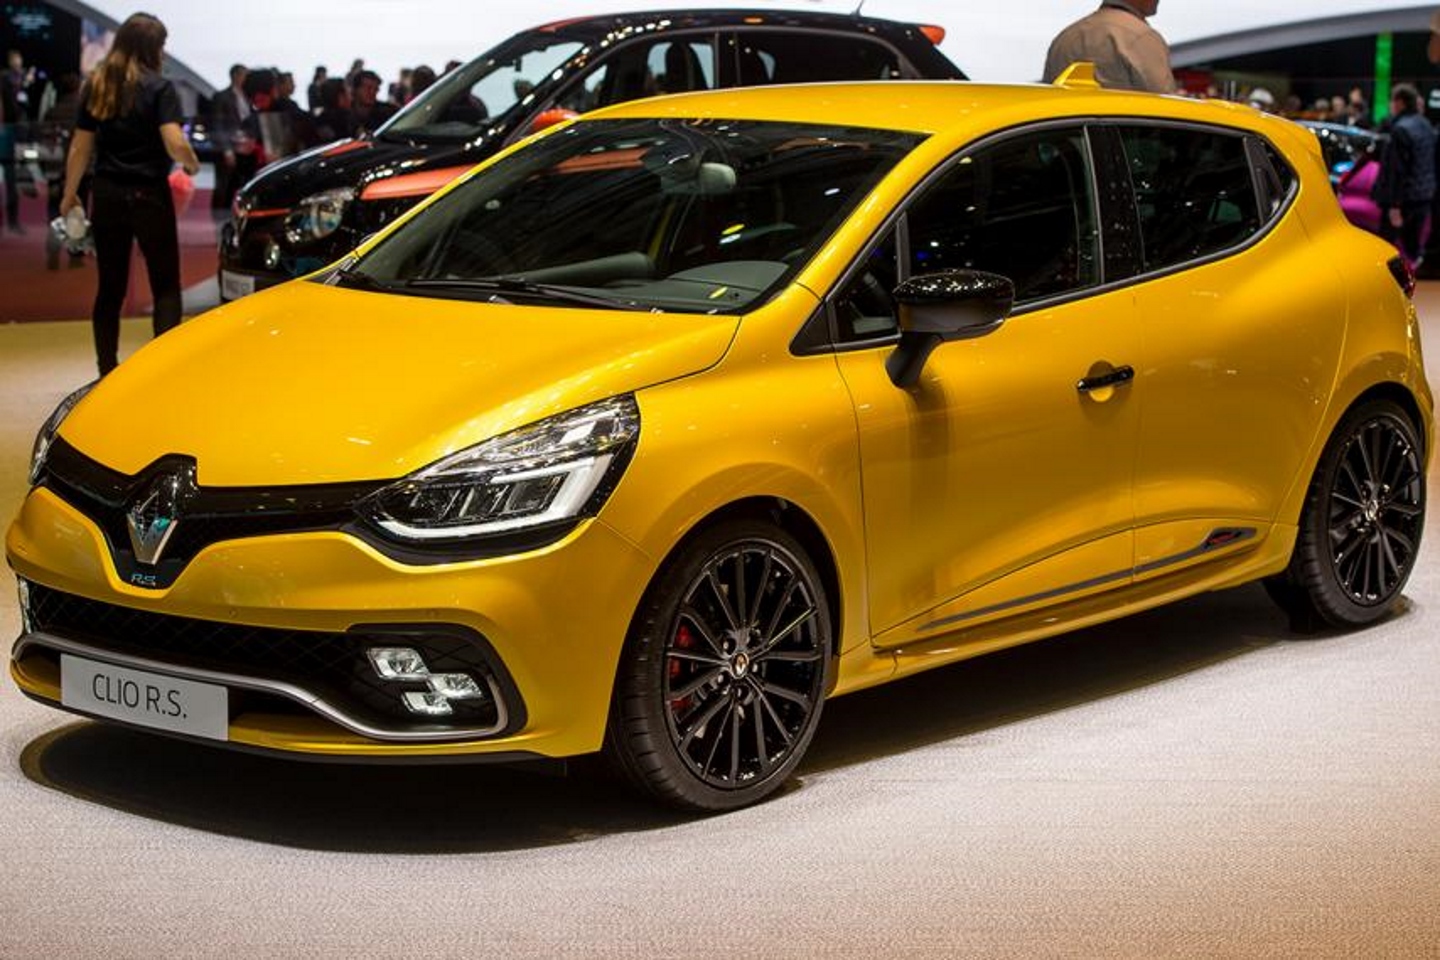 Renault Clio RS. Фото: Robert Hradil/Getty Images